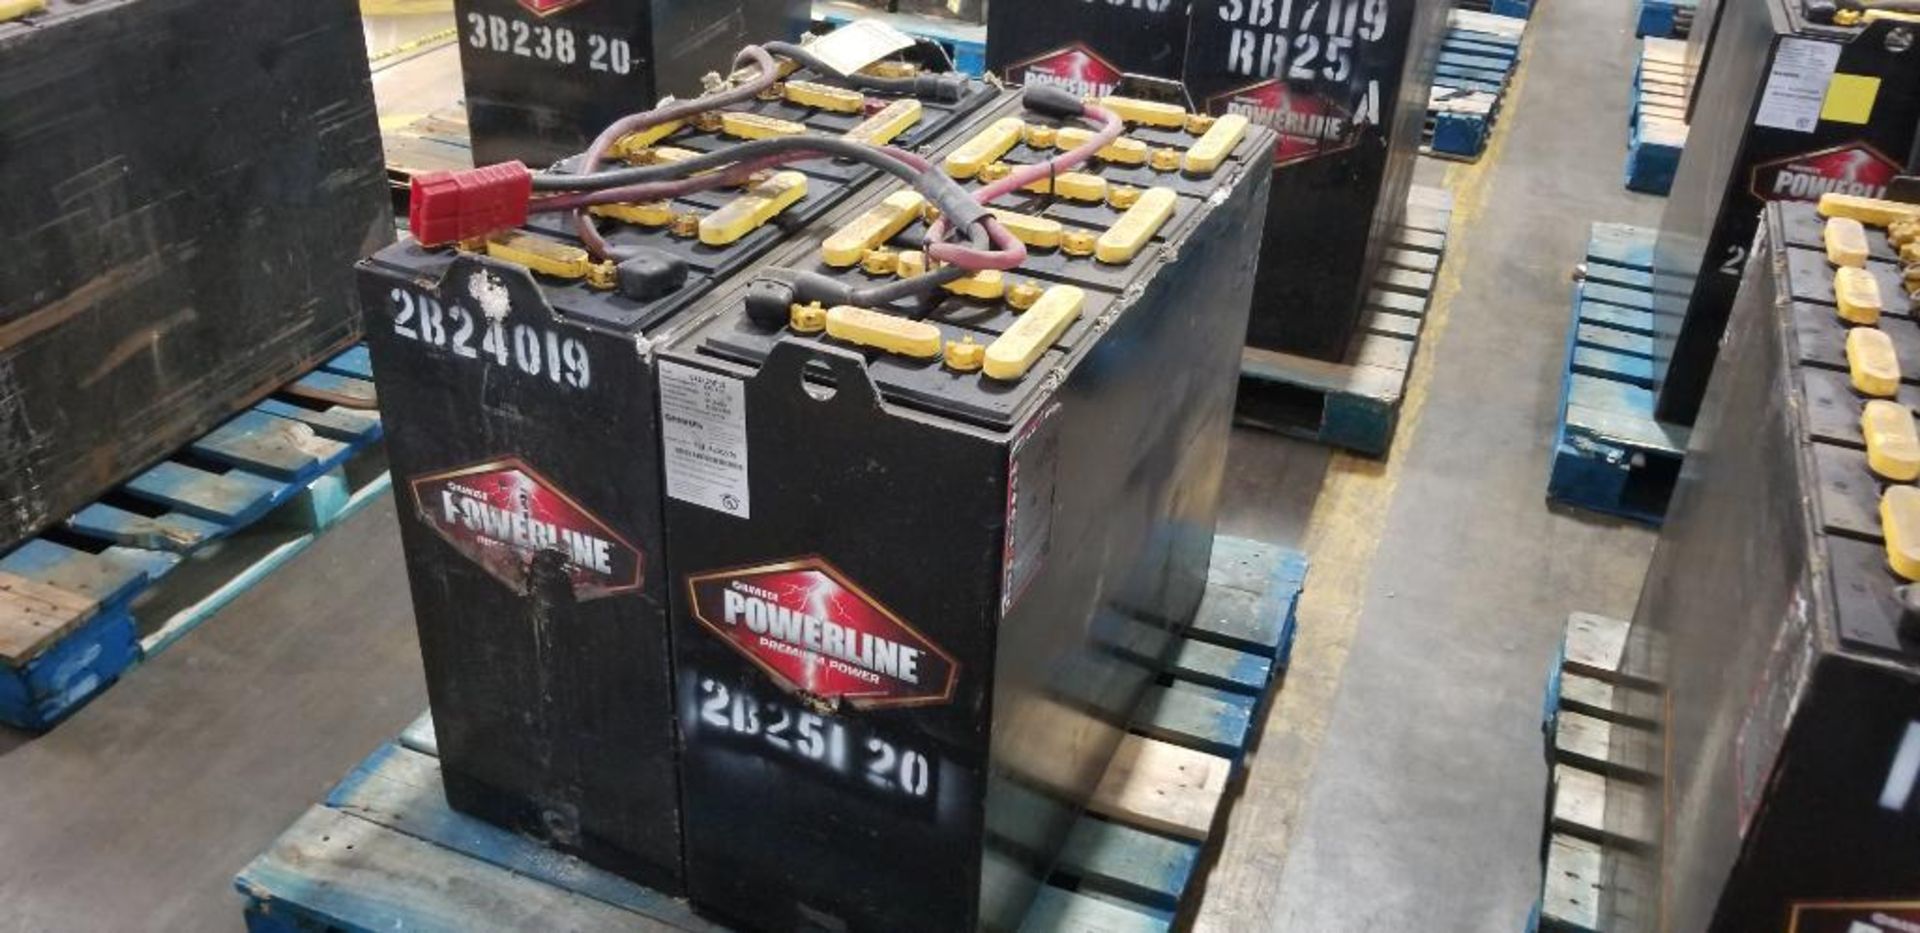 (2x) Hawker Powerline Batteries, 24V, 875A.H., Battery Weight: 1,713 & 1,769 LB., L36"xW14"xH31" ($5 - Image 3 of 7